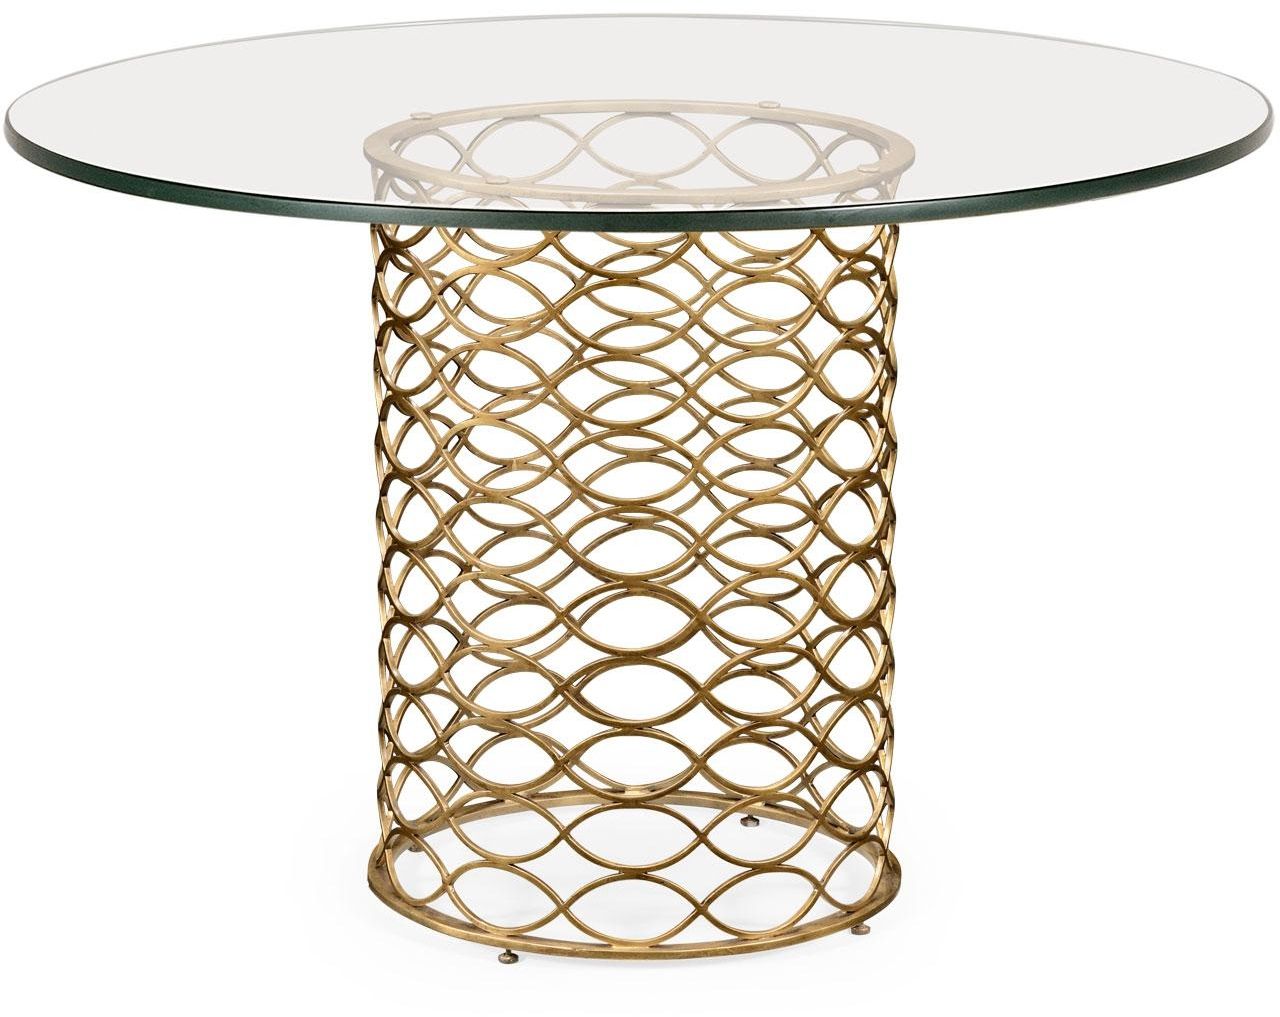 JONATHAN CHARLES LUXE Dining Table Contemporary Circular Top Frame of